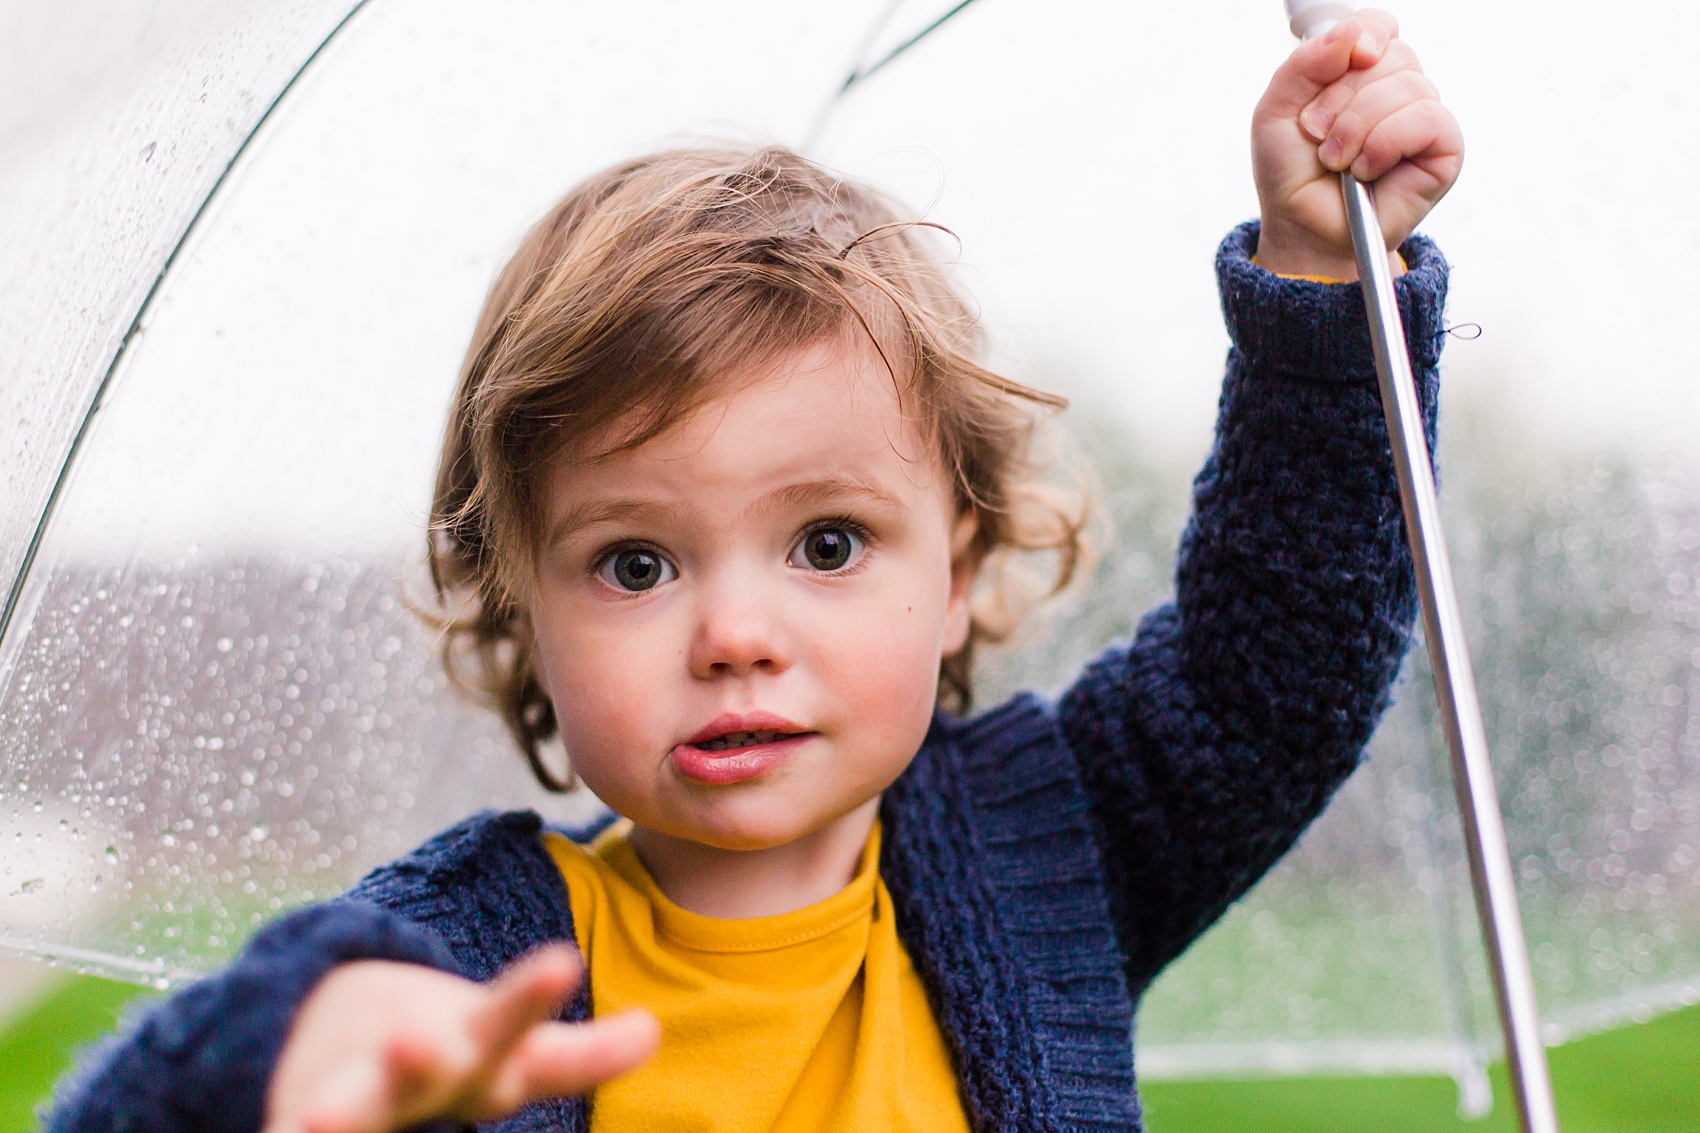 Leah Hope Photography | Phoenix Scottsdale Arizona Outdoor Rainy Day Clear Umbrella Toddler Lifestyle Pictures